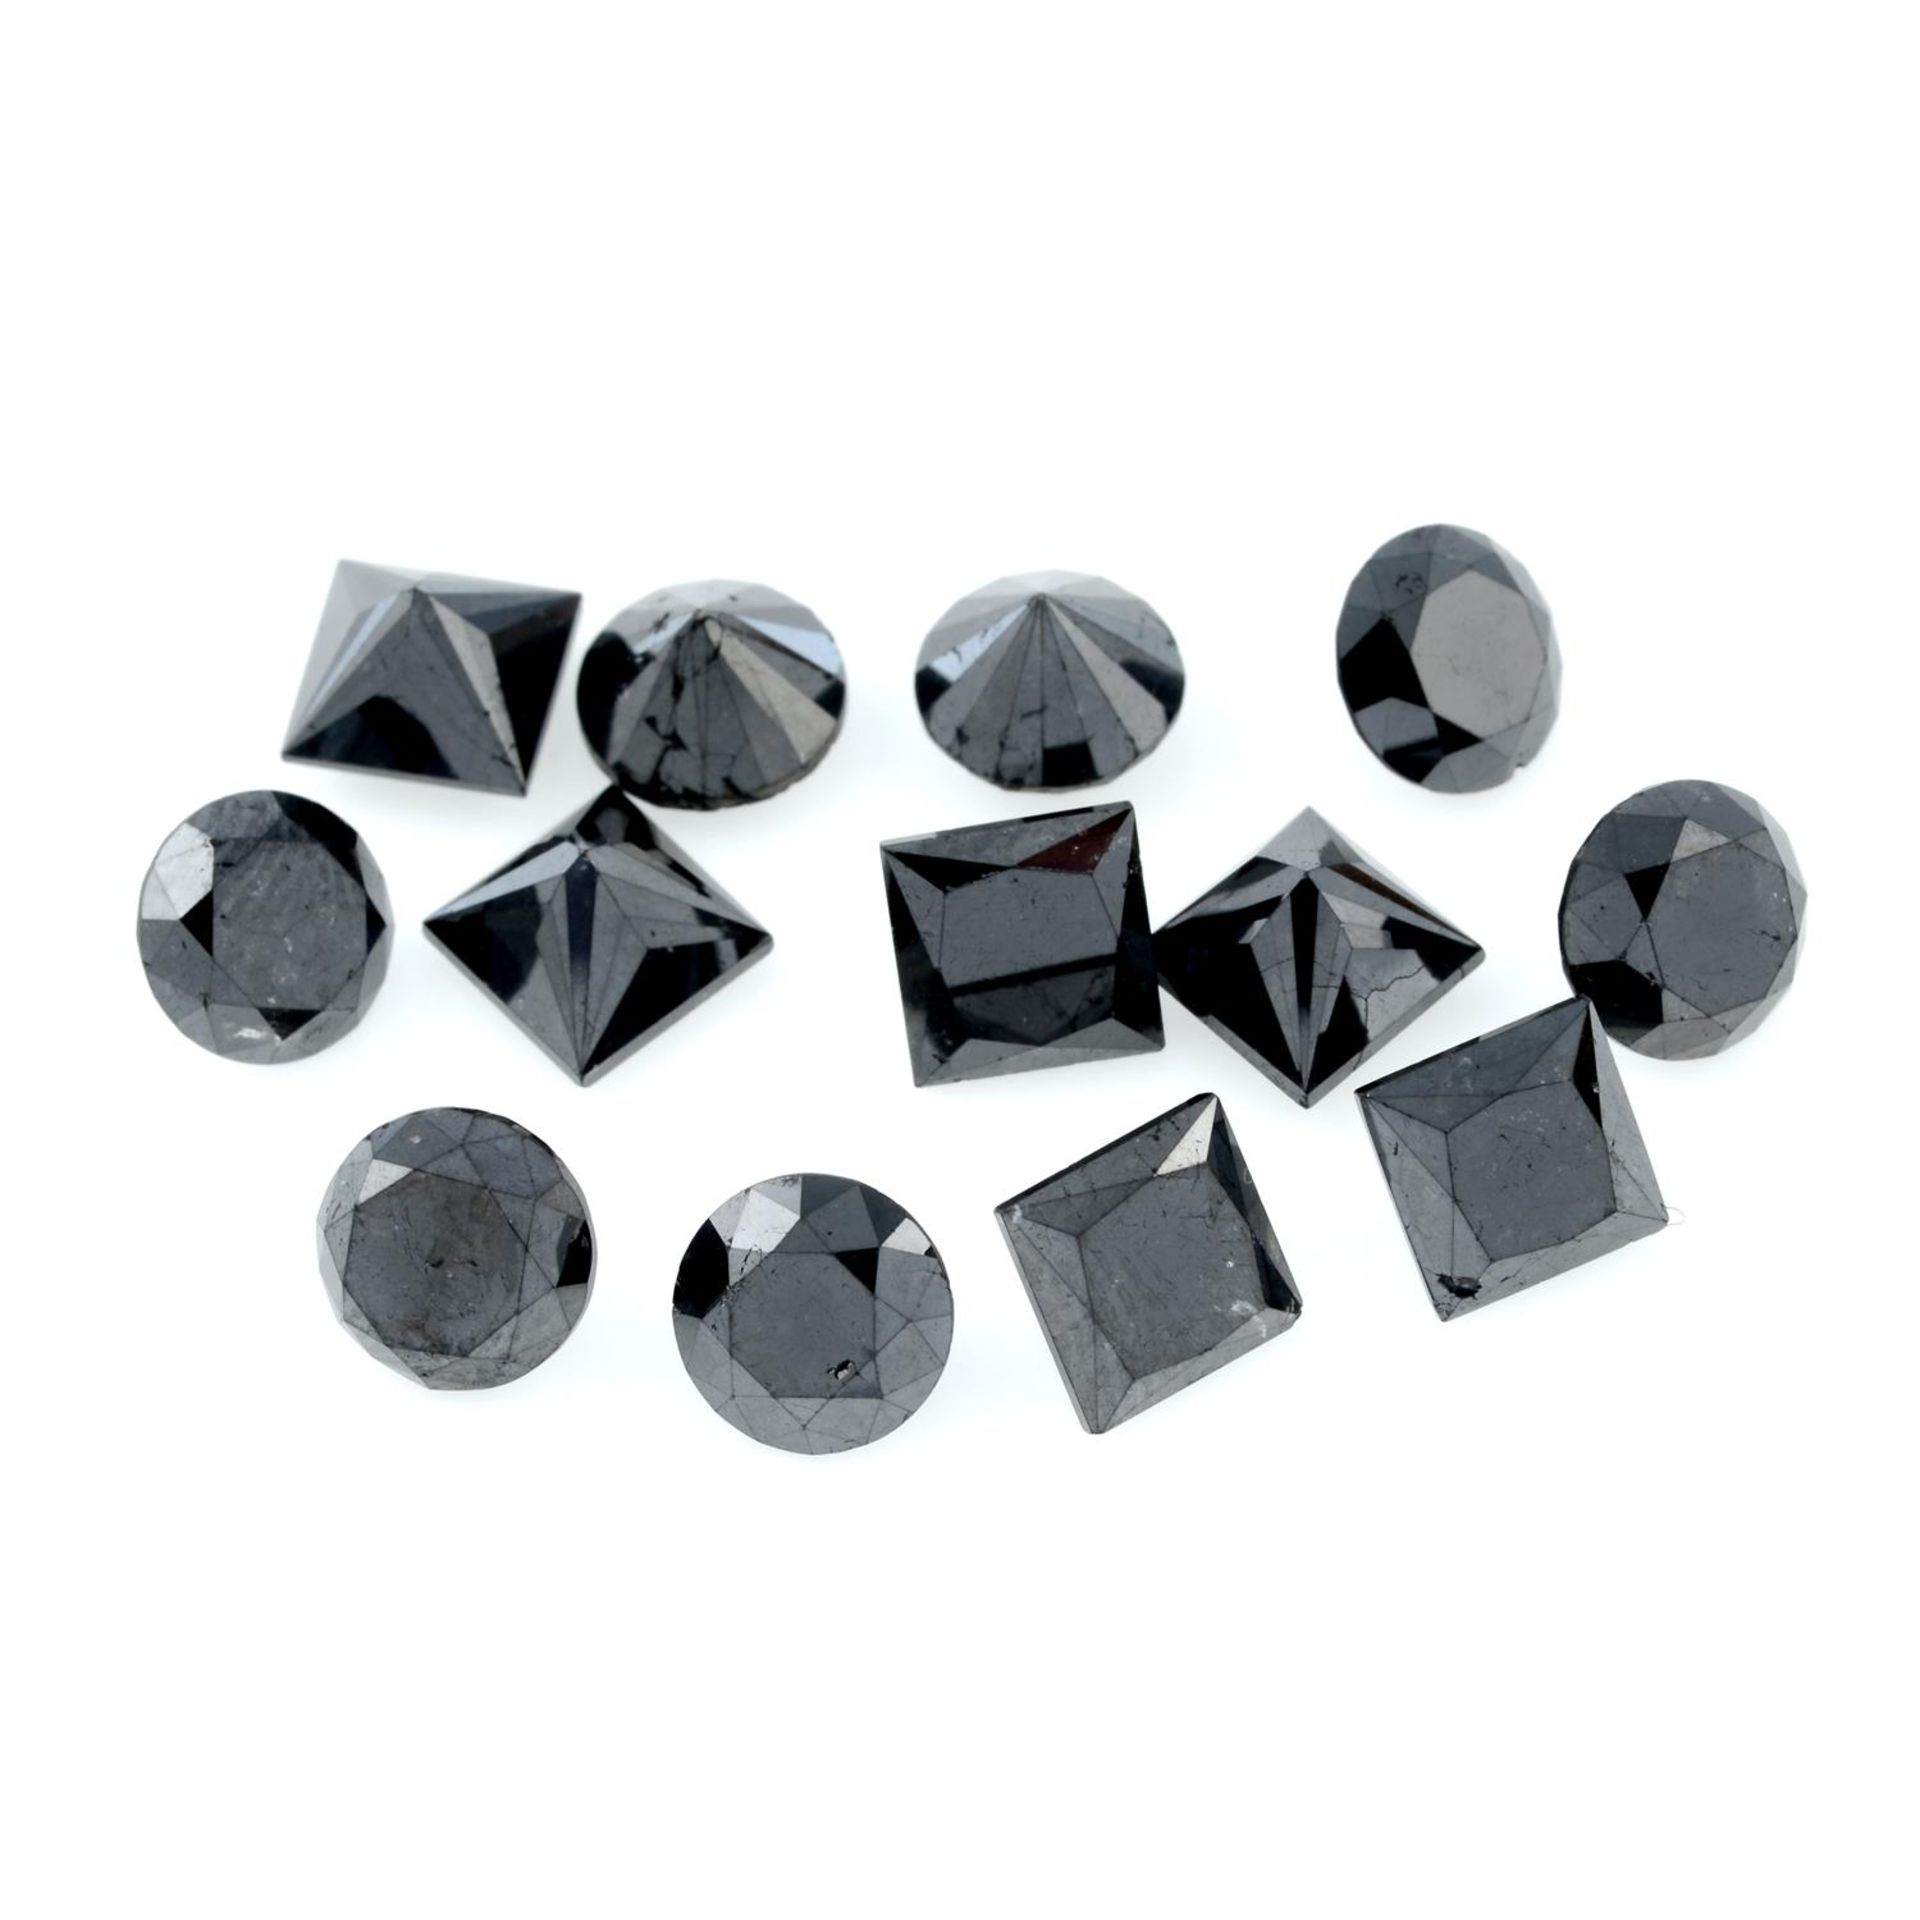 Six square shape and seven circular shape black gemstones, weighing 22.36ct